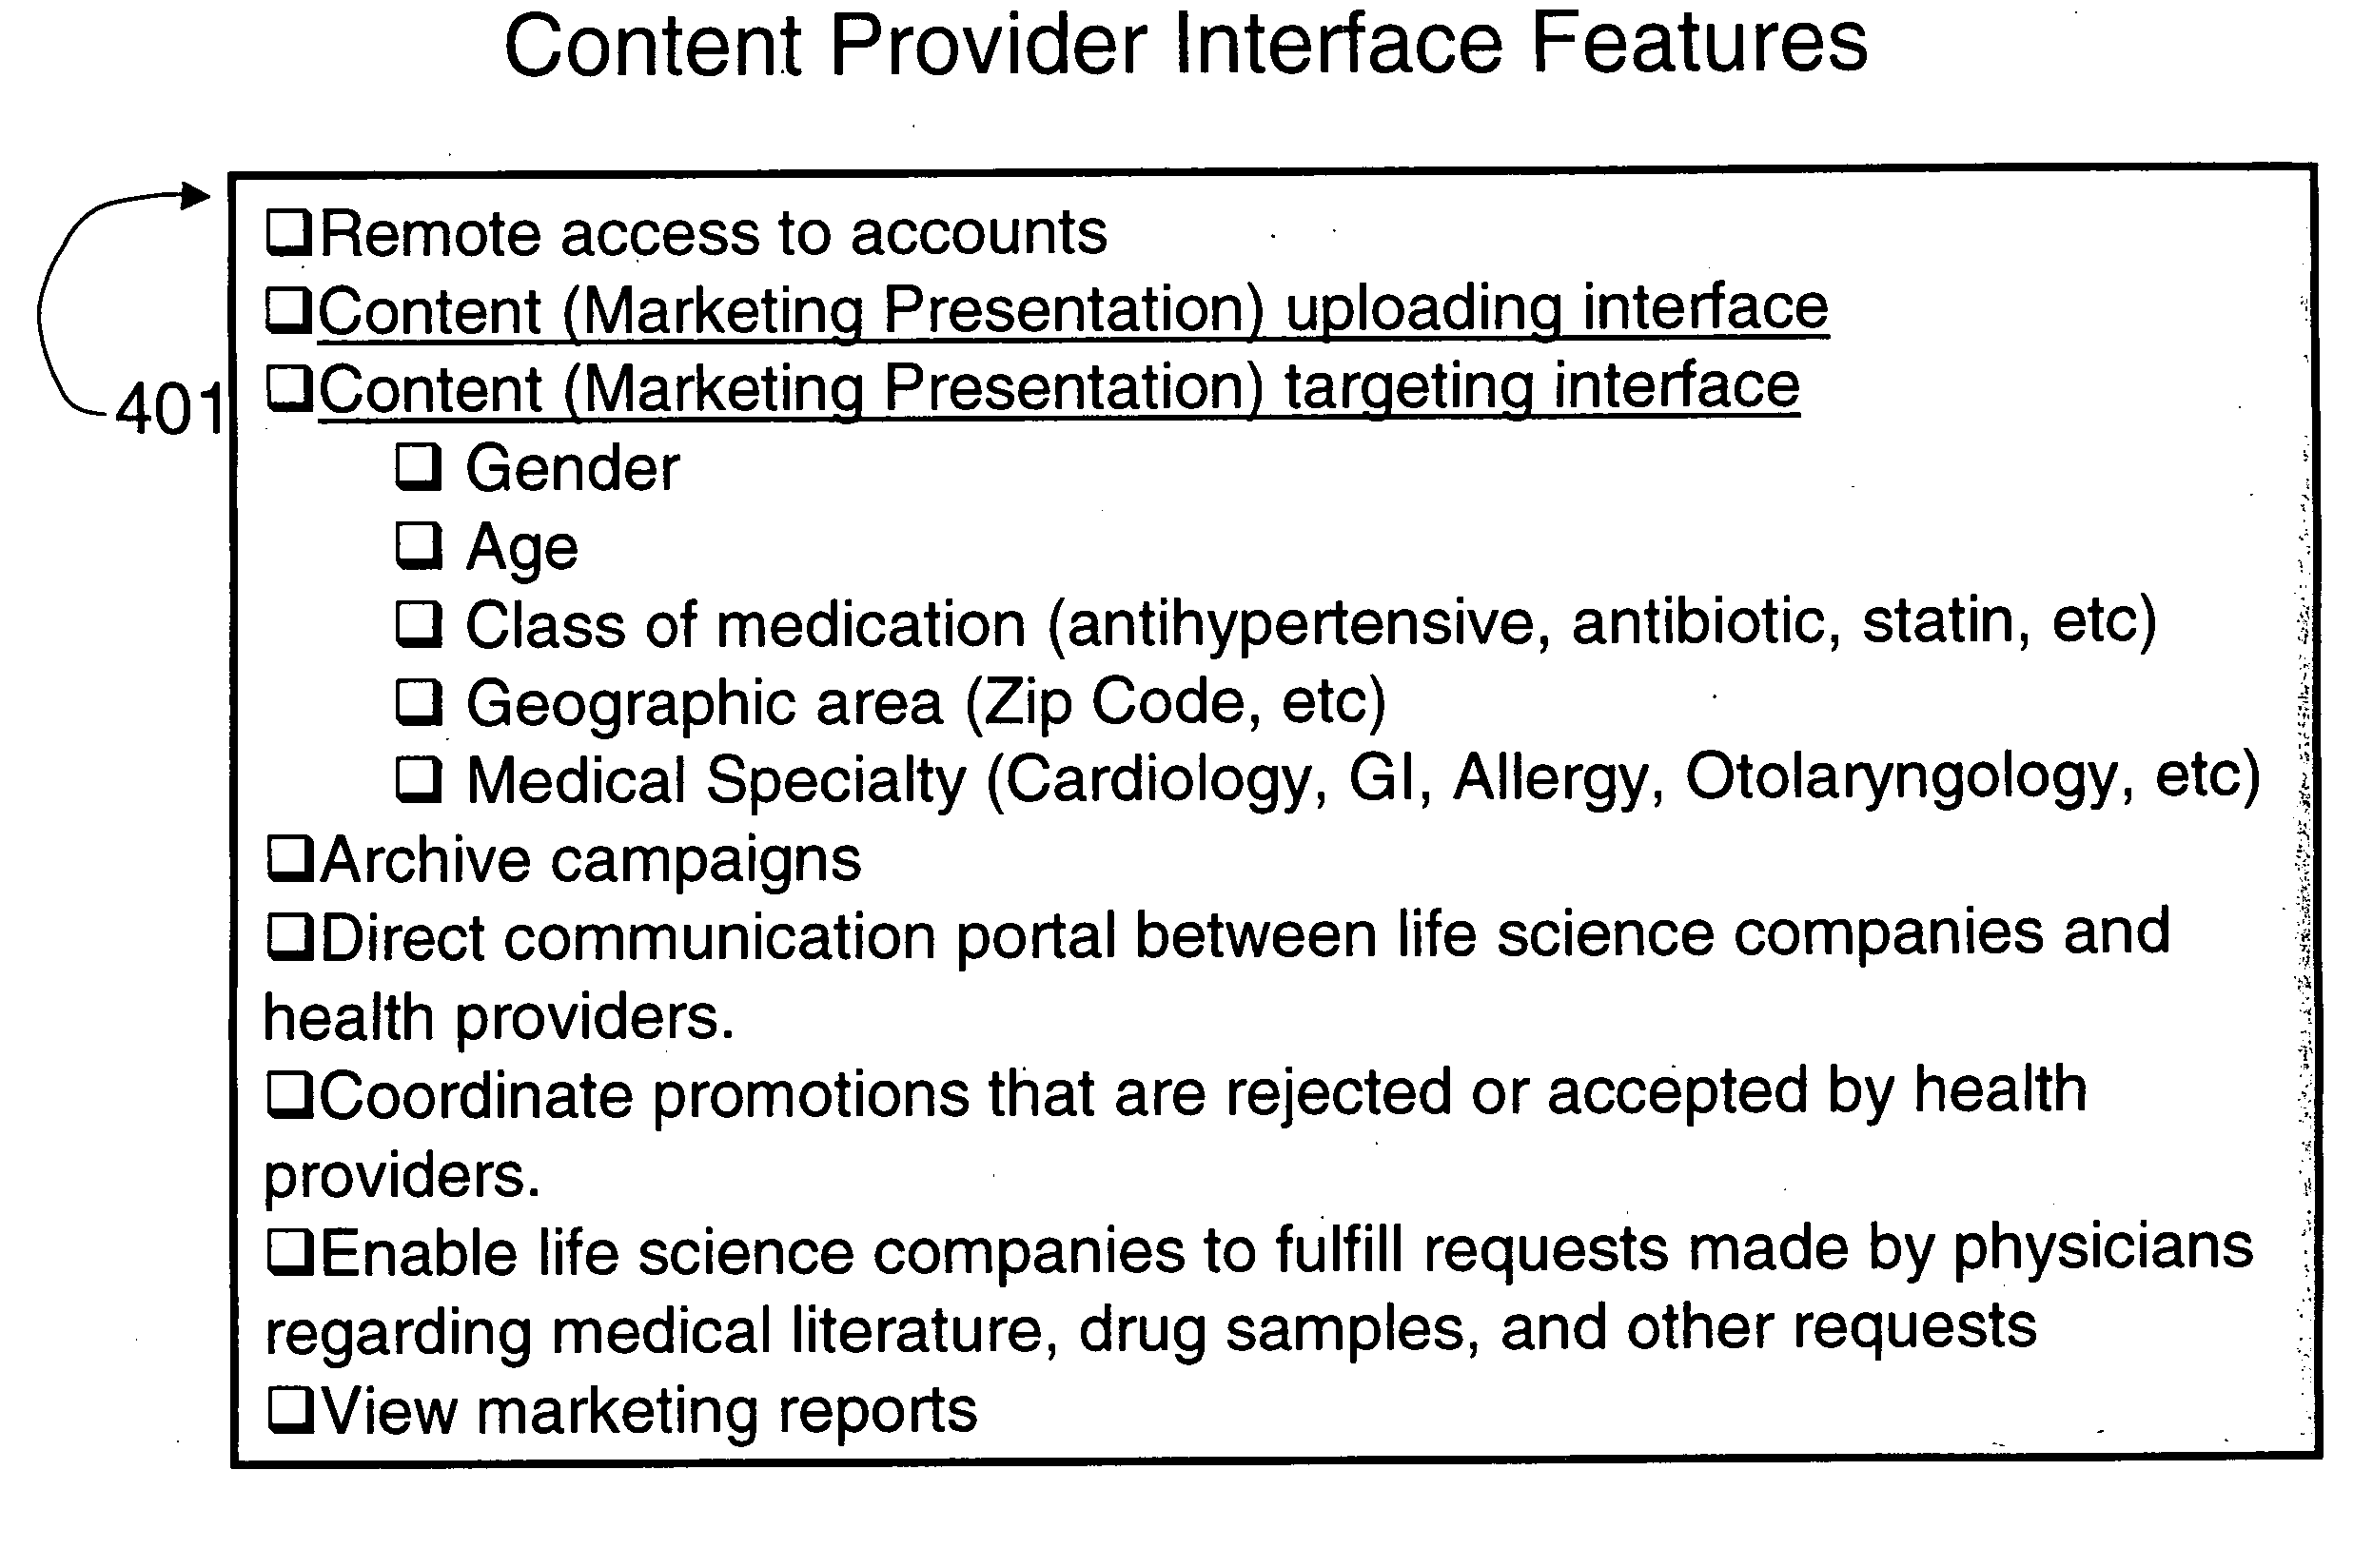 Systems and methods for marketing health products and/or services to health consumers and health providers